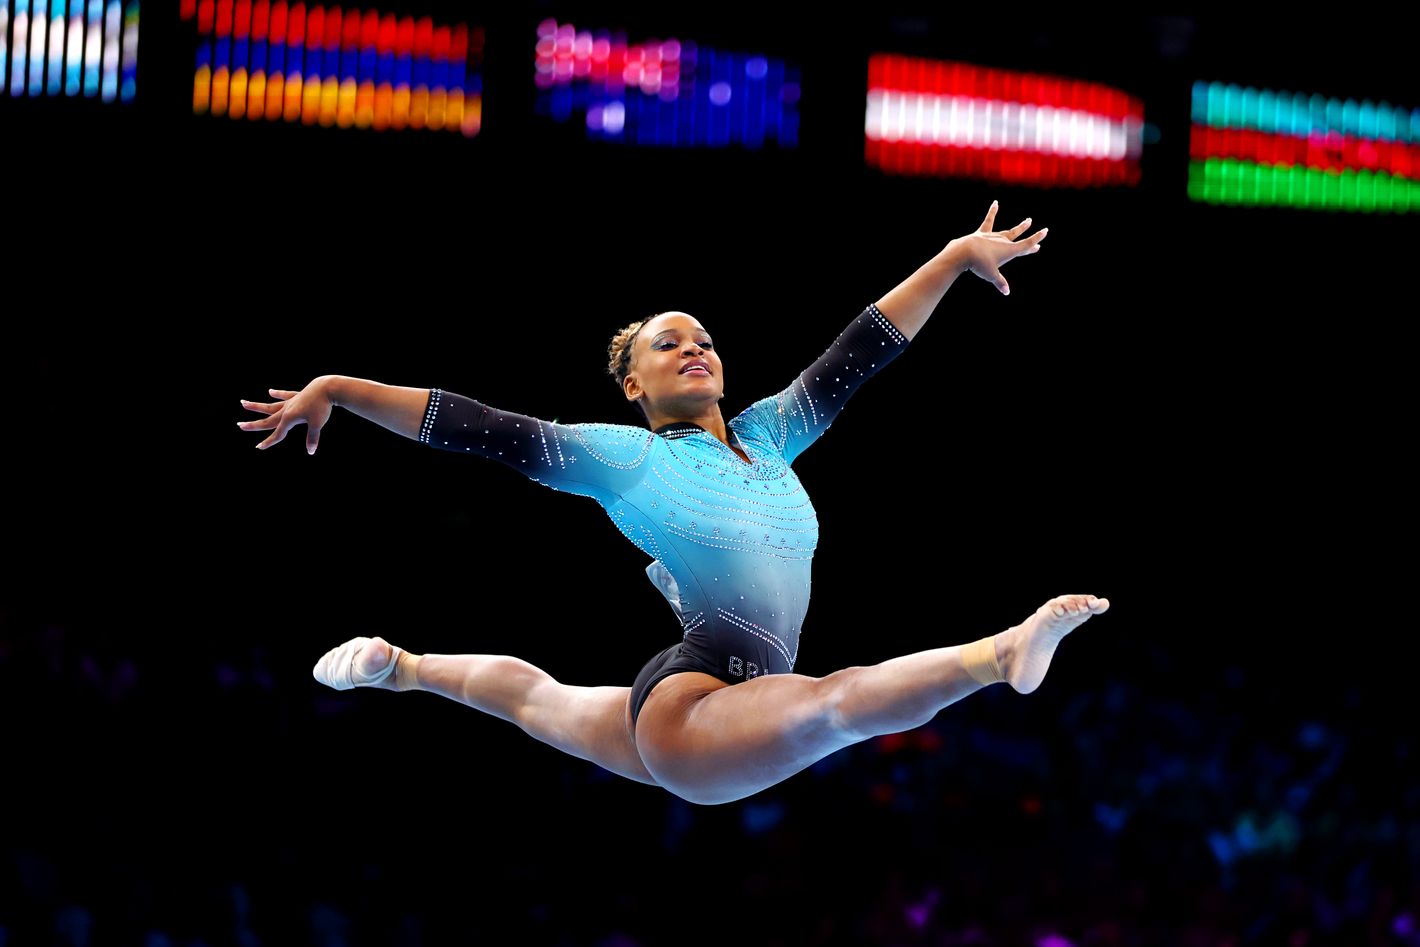 Who Is Rebeca Andrade, Simone Biles’s Biggest Competition?